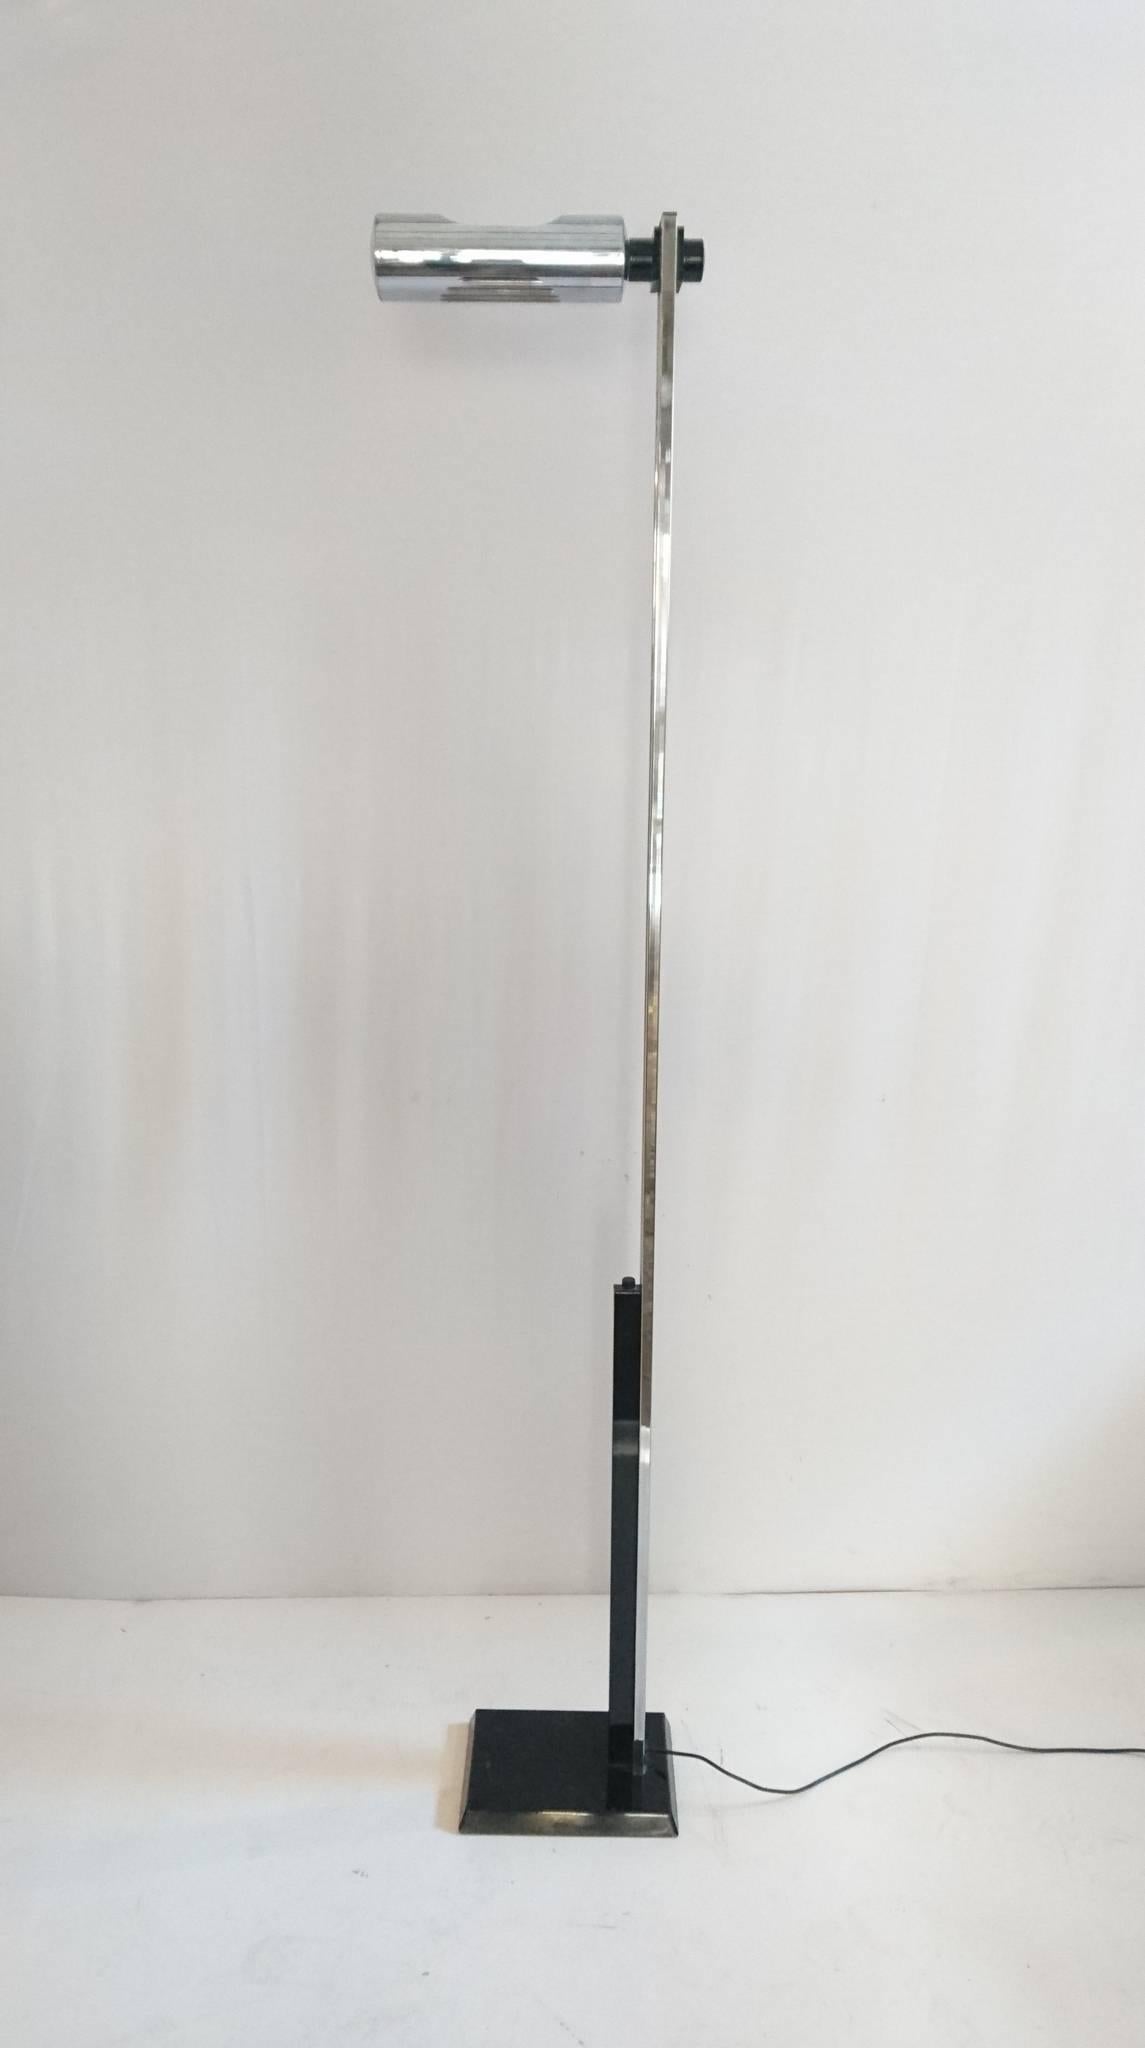 Floor lamp in chrome and black metal with a lamp which is fully adjustable in height and direction. Very nice condition.